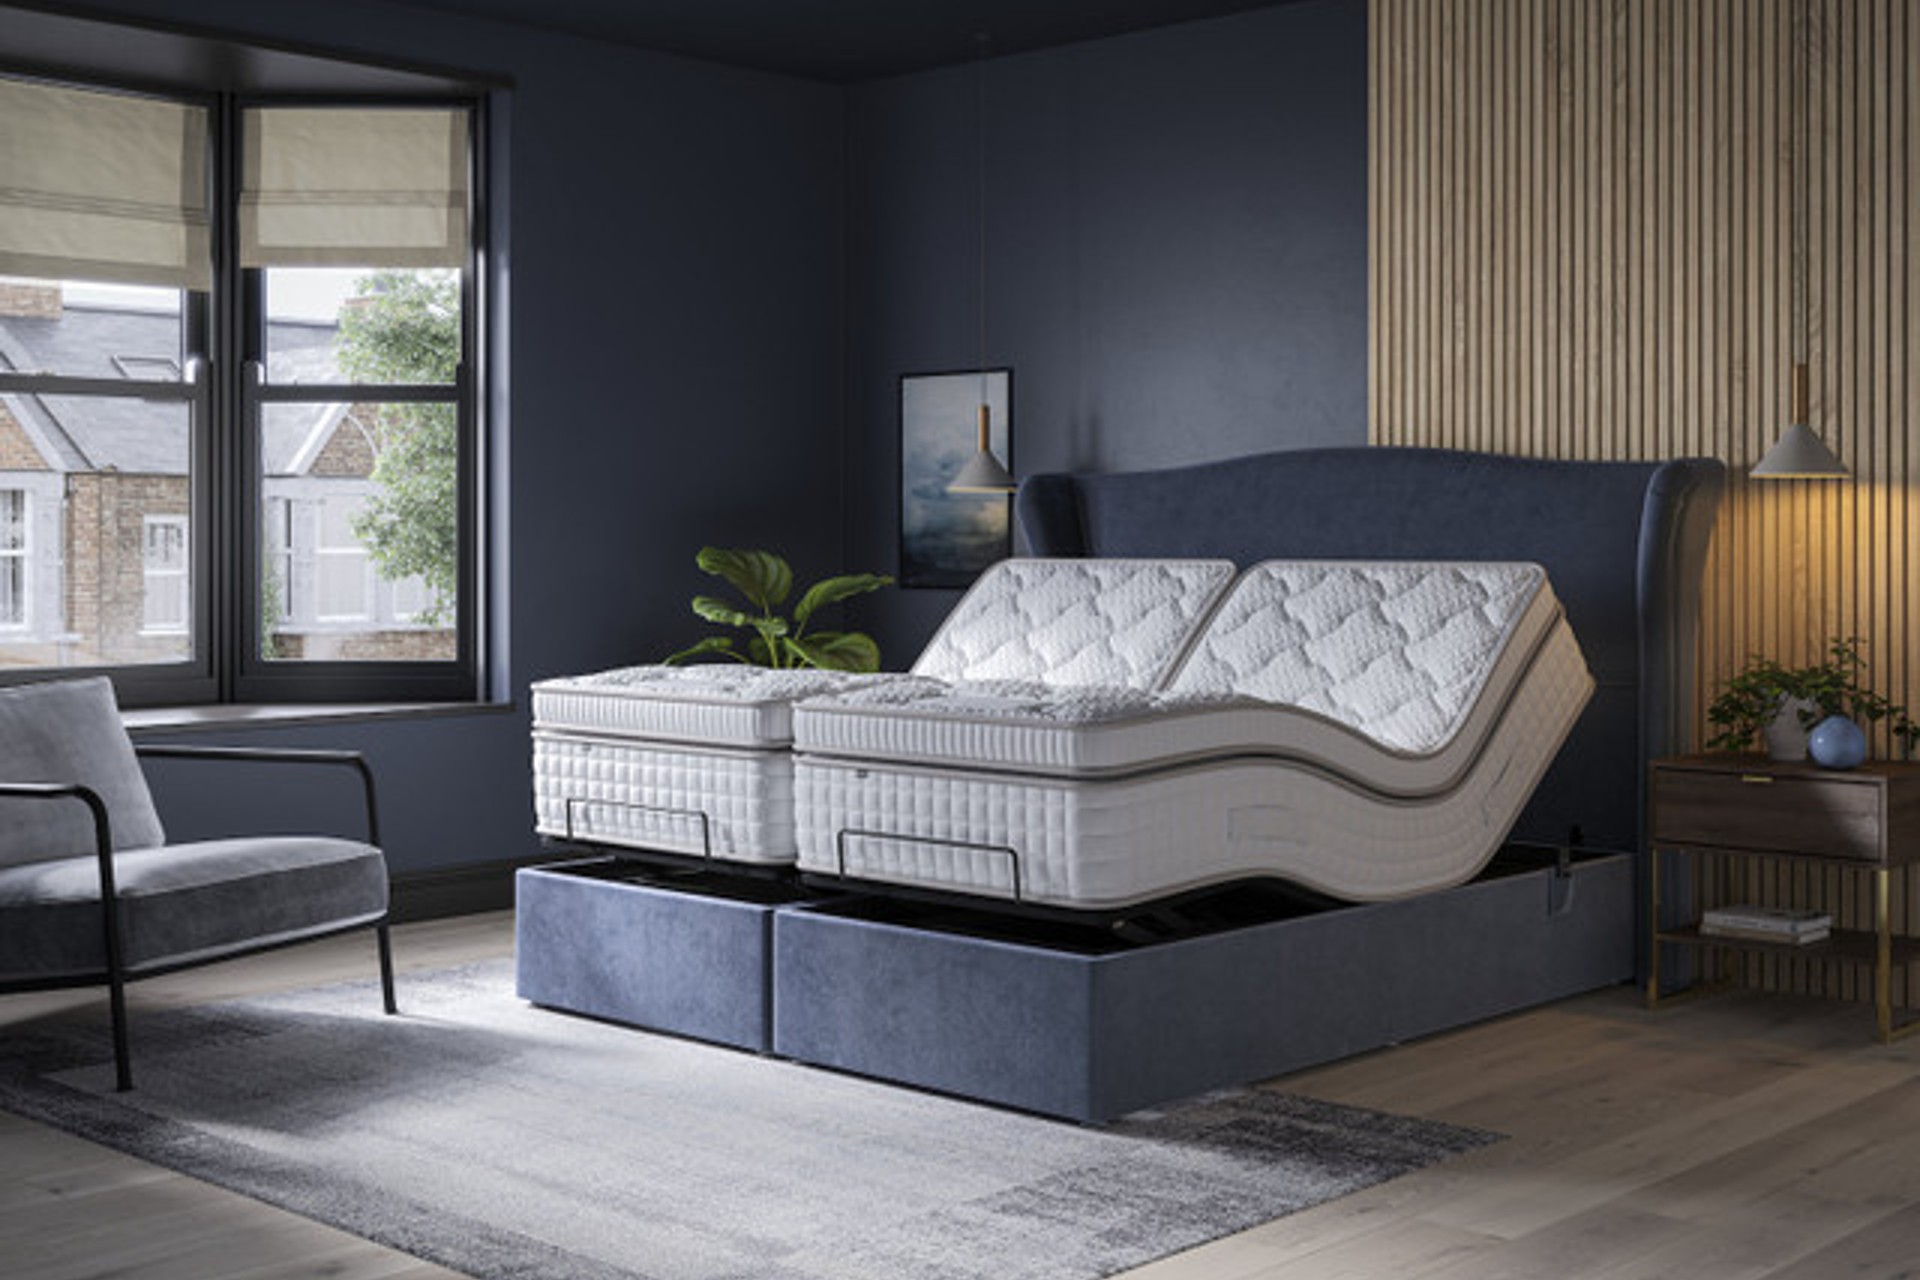 Tech Memory Motion Plushtop Adjustable Divan bed and mattress set upholstered in deep blue bespoke Prussian fabric